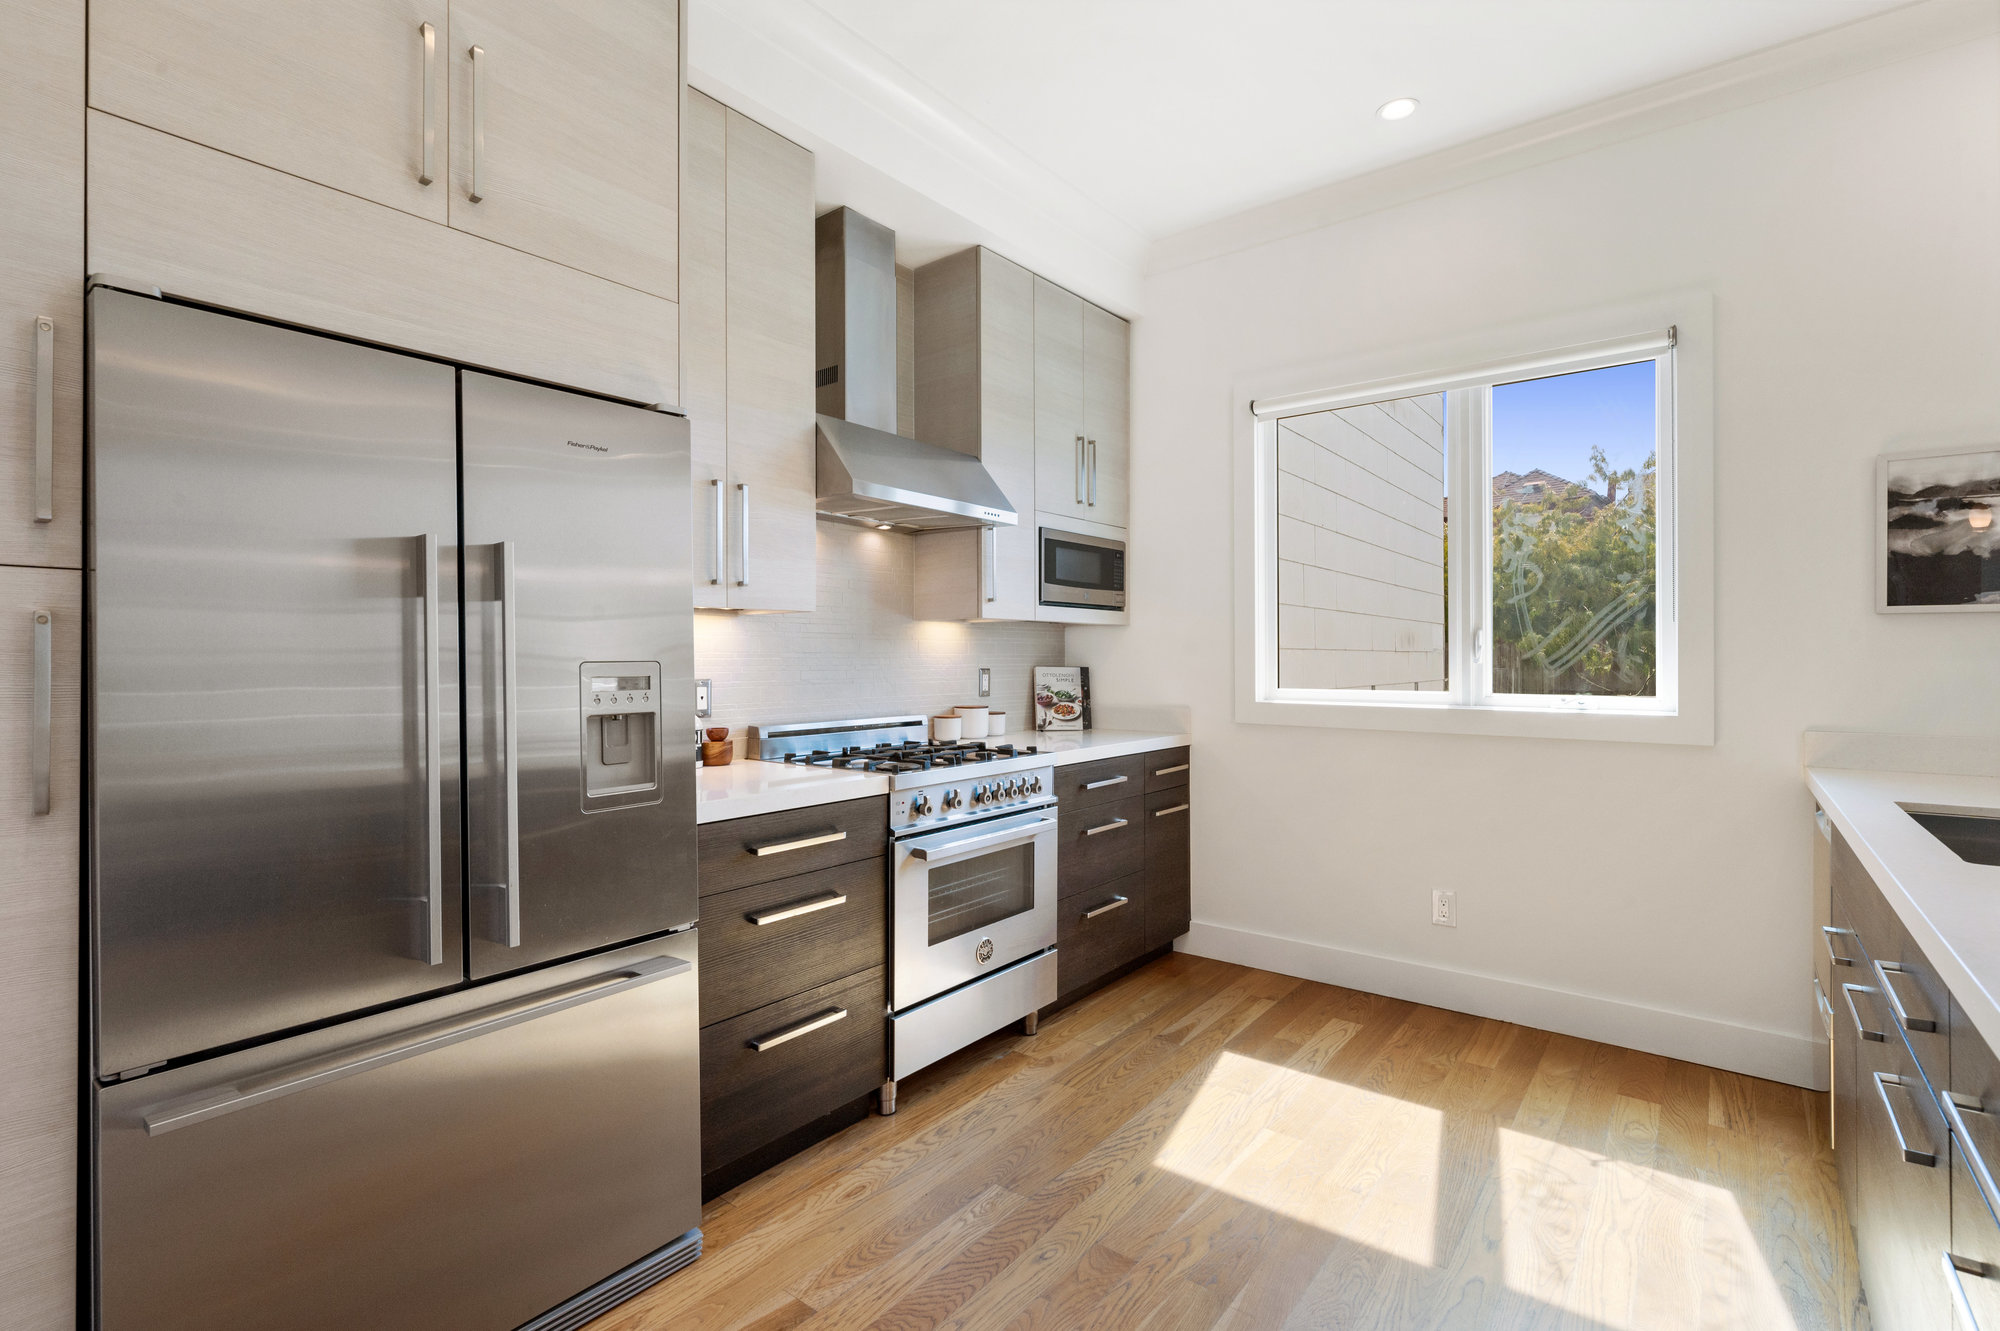 Property Photo: View of the kitchen, showing a large stainless refrigerator and window